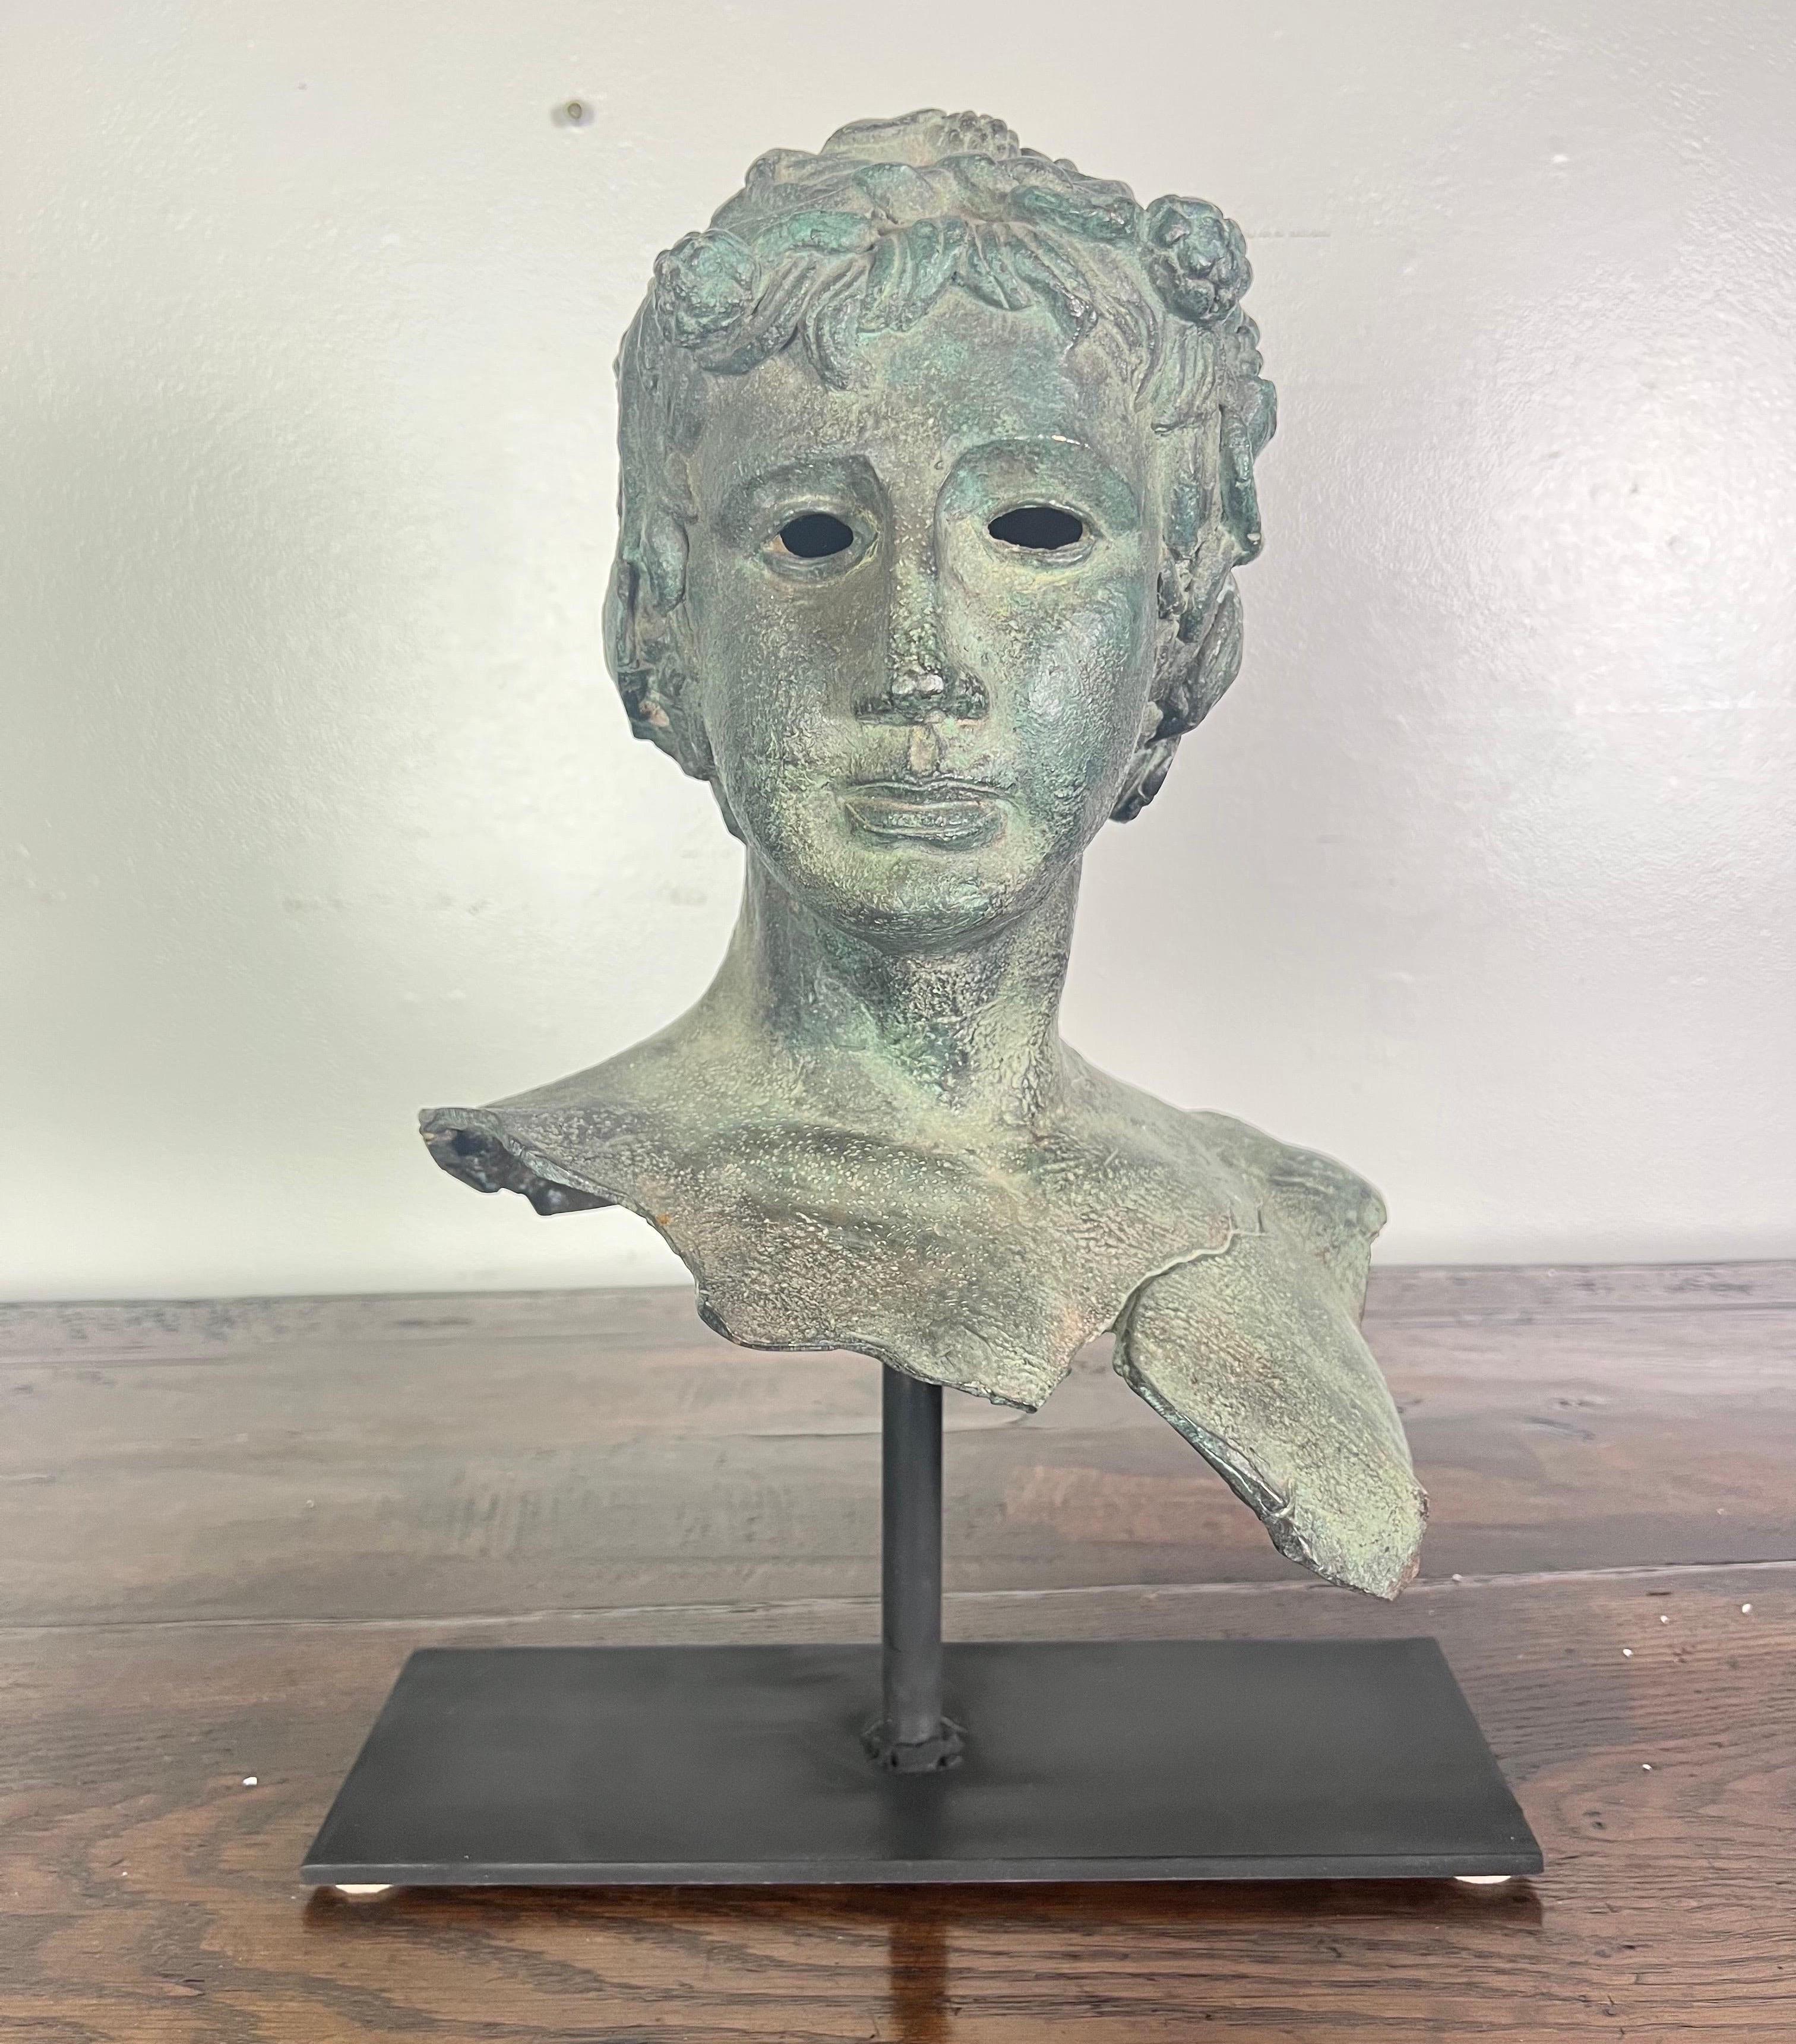 19th century French bronze head of a boy mounted on an iron base.  It is a great accent for a side table or bookshelf.